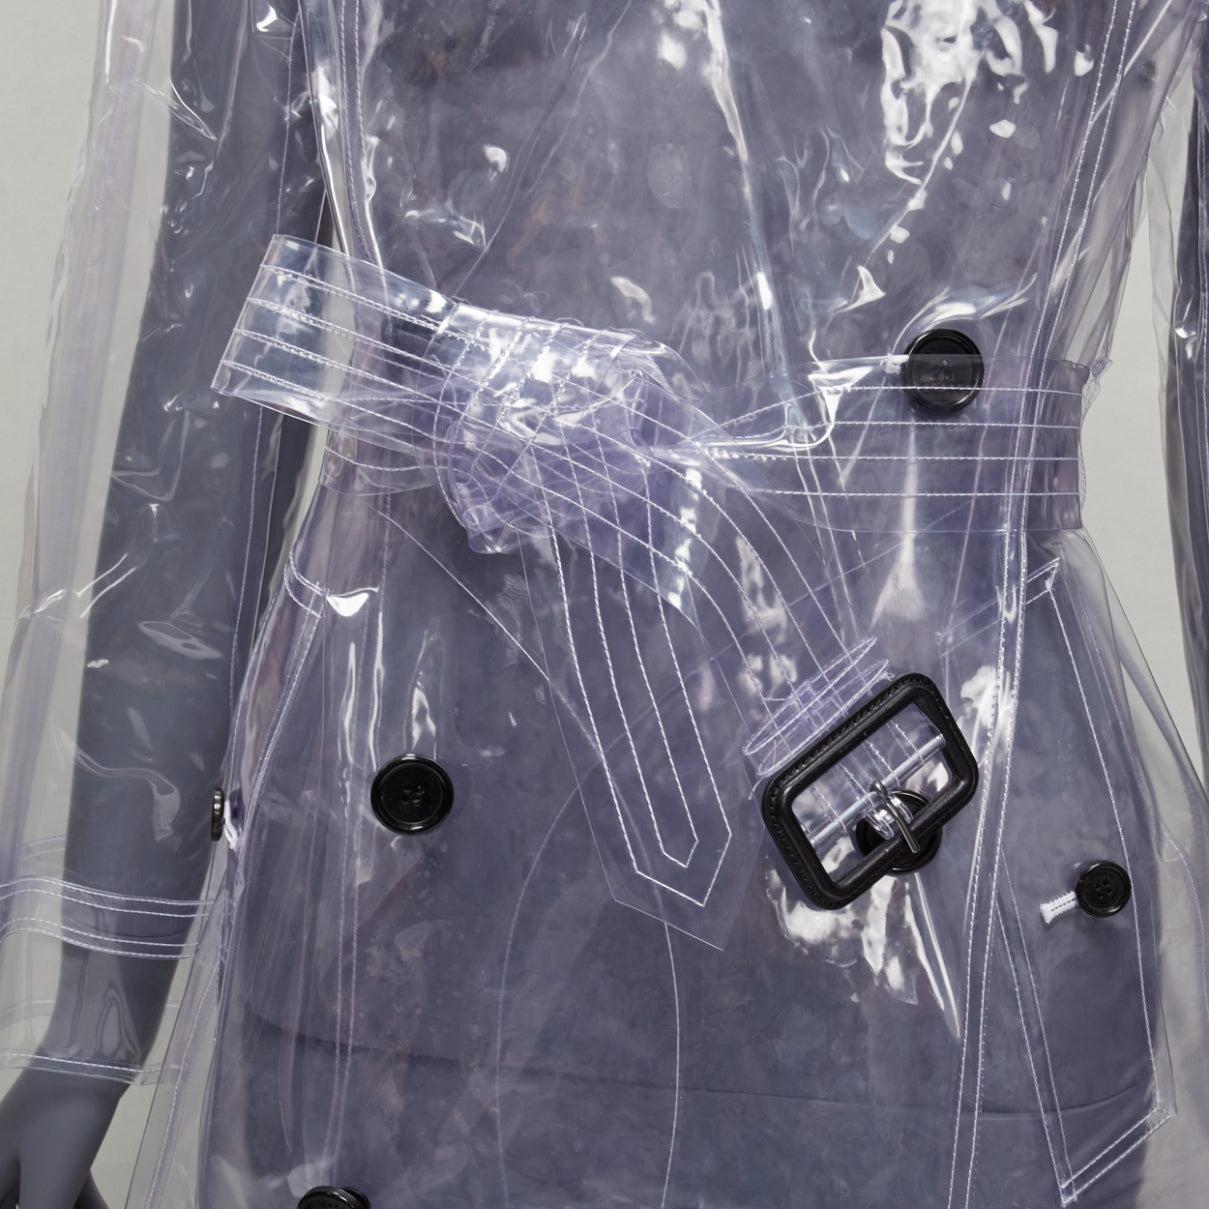 rare BURBERRY 2018 transparent clear PVC trench coat raincoat UK6 M
Reference: BSHW/A00007
Brand: Burberry
Designer: Christopher Bailey
Collection: SS 2018
Material: Plastic
Color: Clear
Pattern: Solid
Closure: Button
Extra Details: Burberry logo